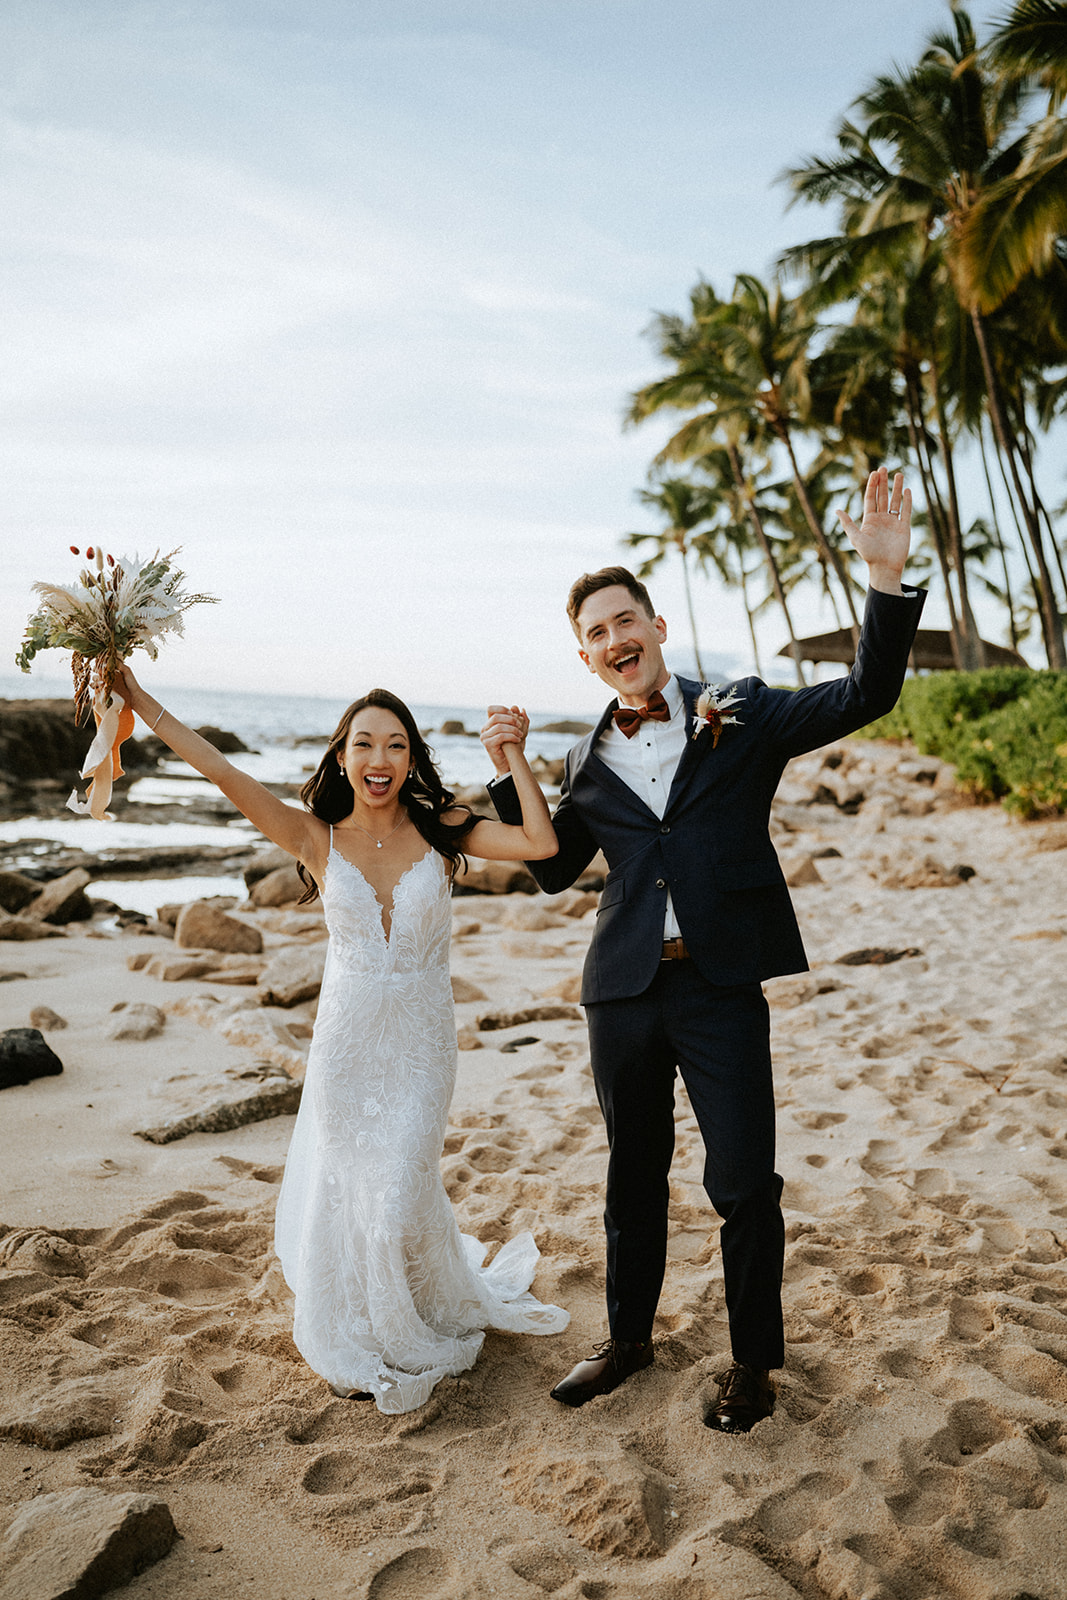 Bride and groom celebrating on the beach fronting Lanikuhonua during sunset